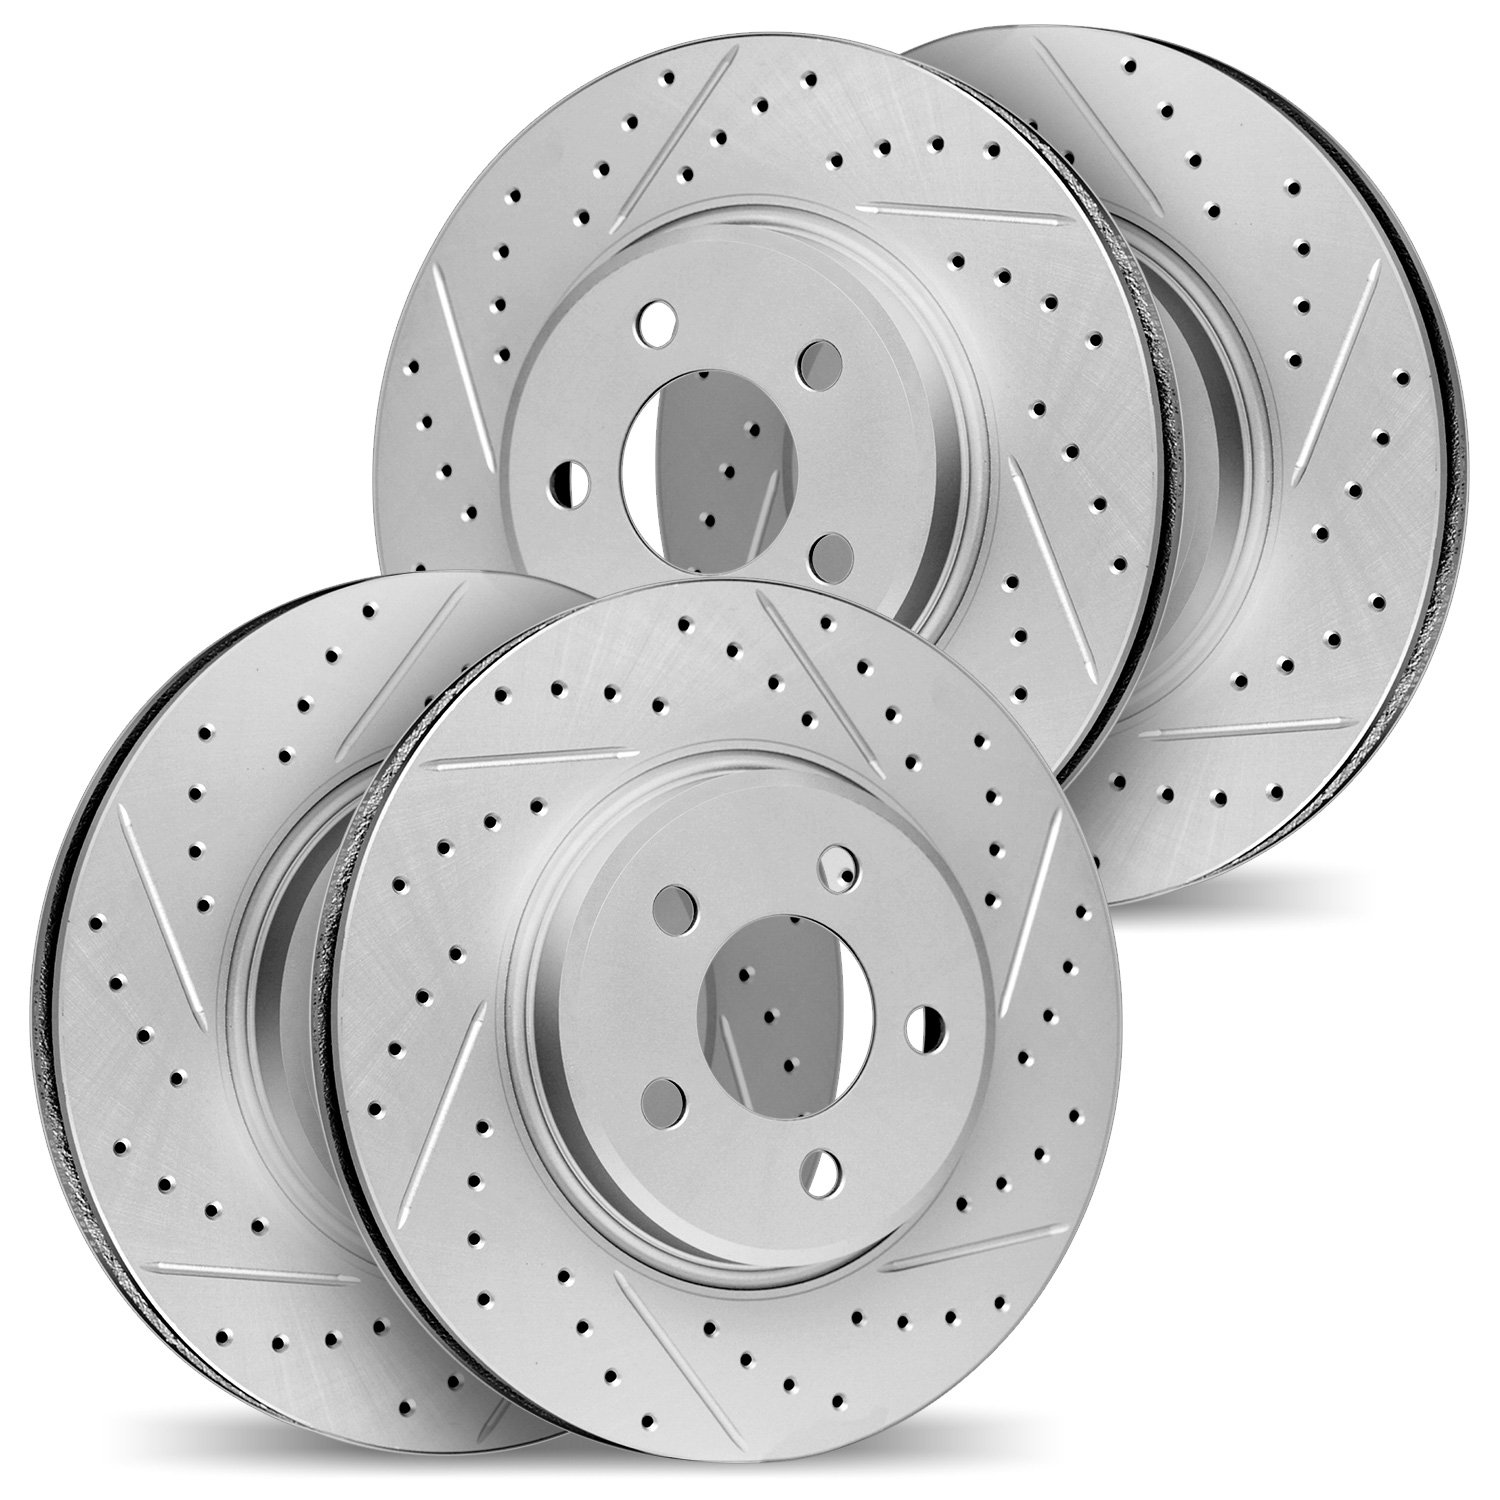 2004-75017 Geoperformance Drilled/Slotted Brake Rotors, 1995-2000 Lexus/Toyota/Scion, Position: Front and Rear